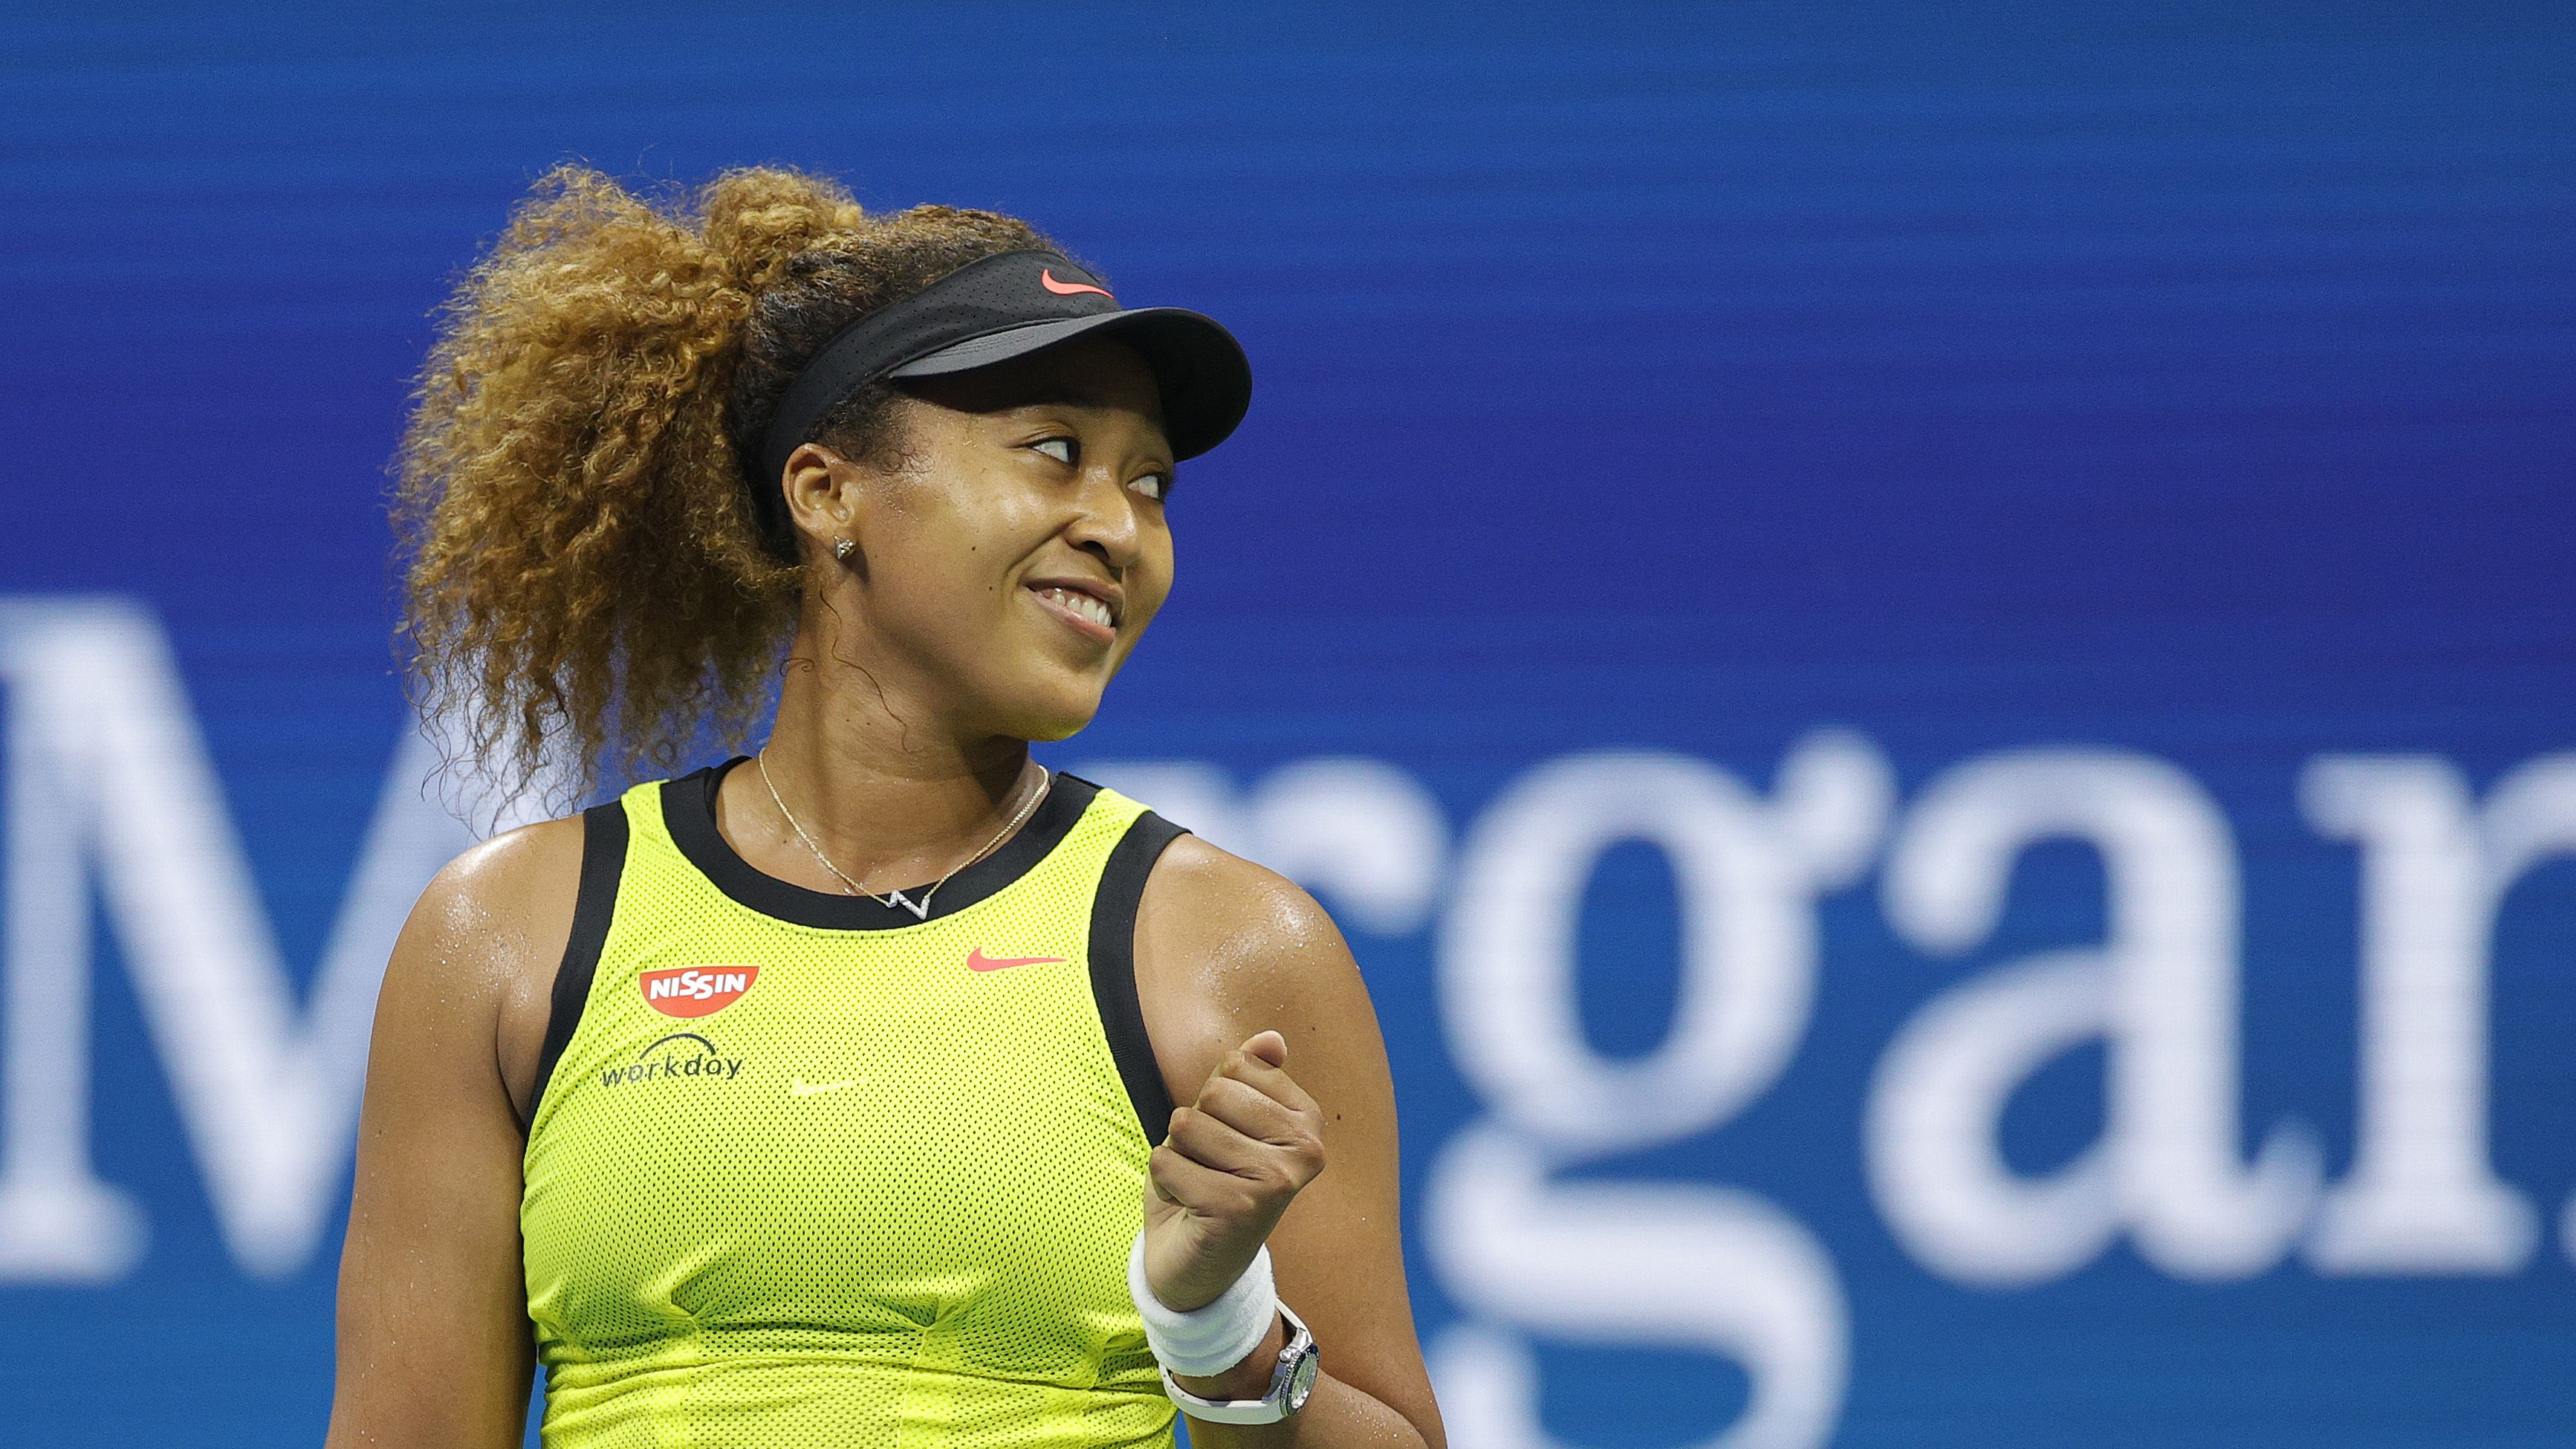 Naomi Osaka Announces She's Pregnant, Expecting First Child With